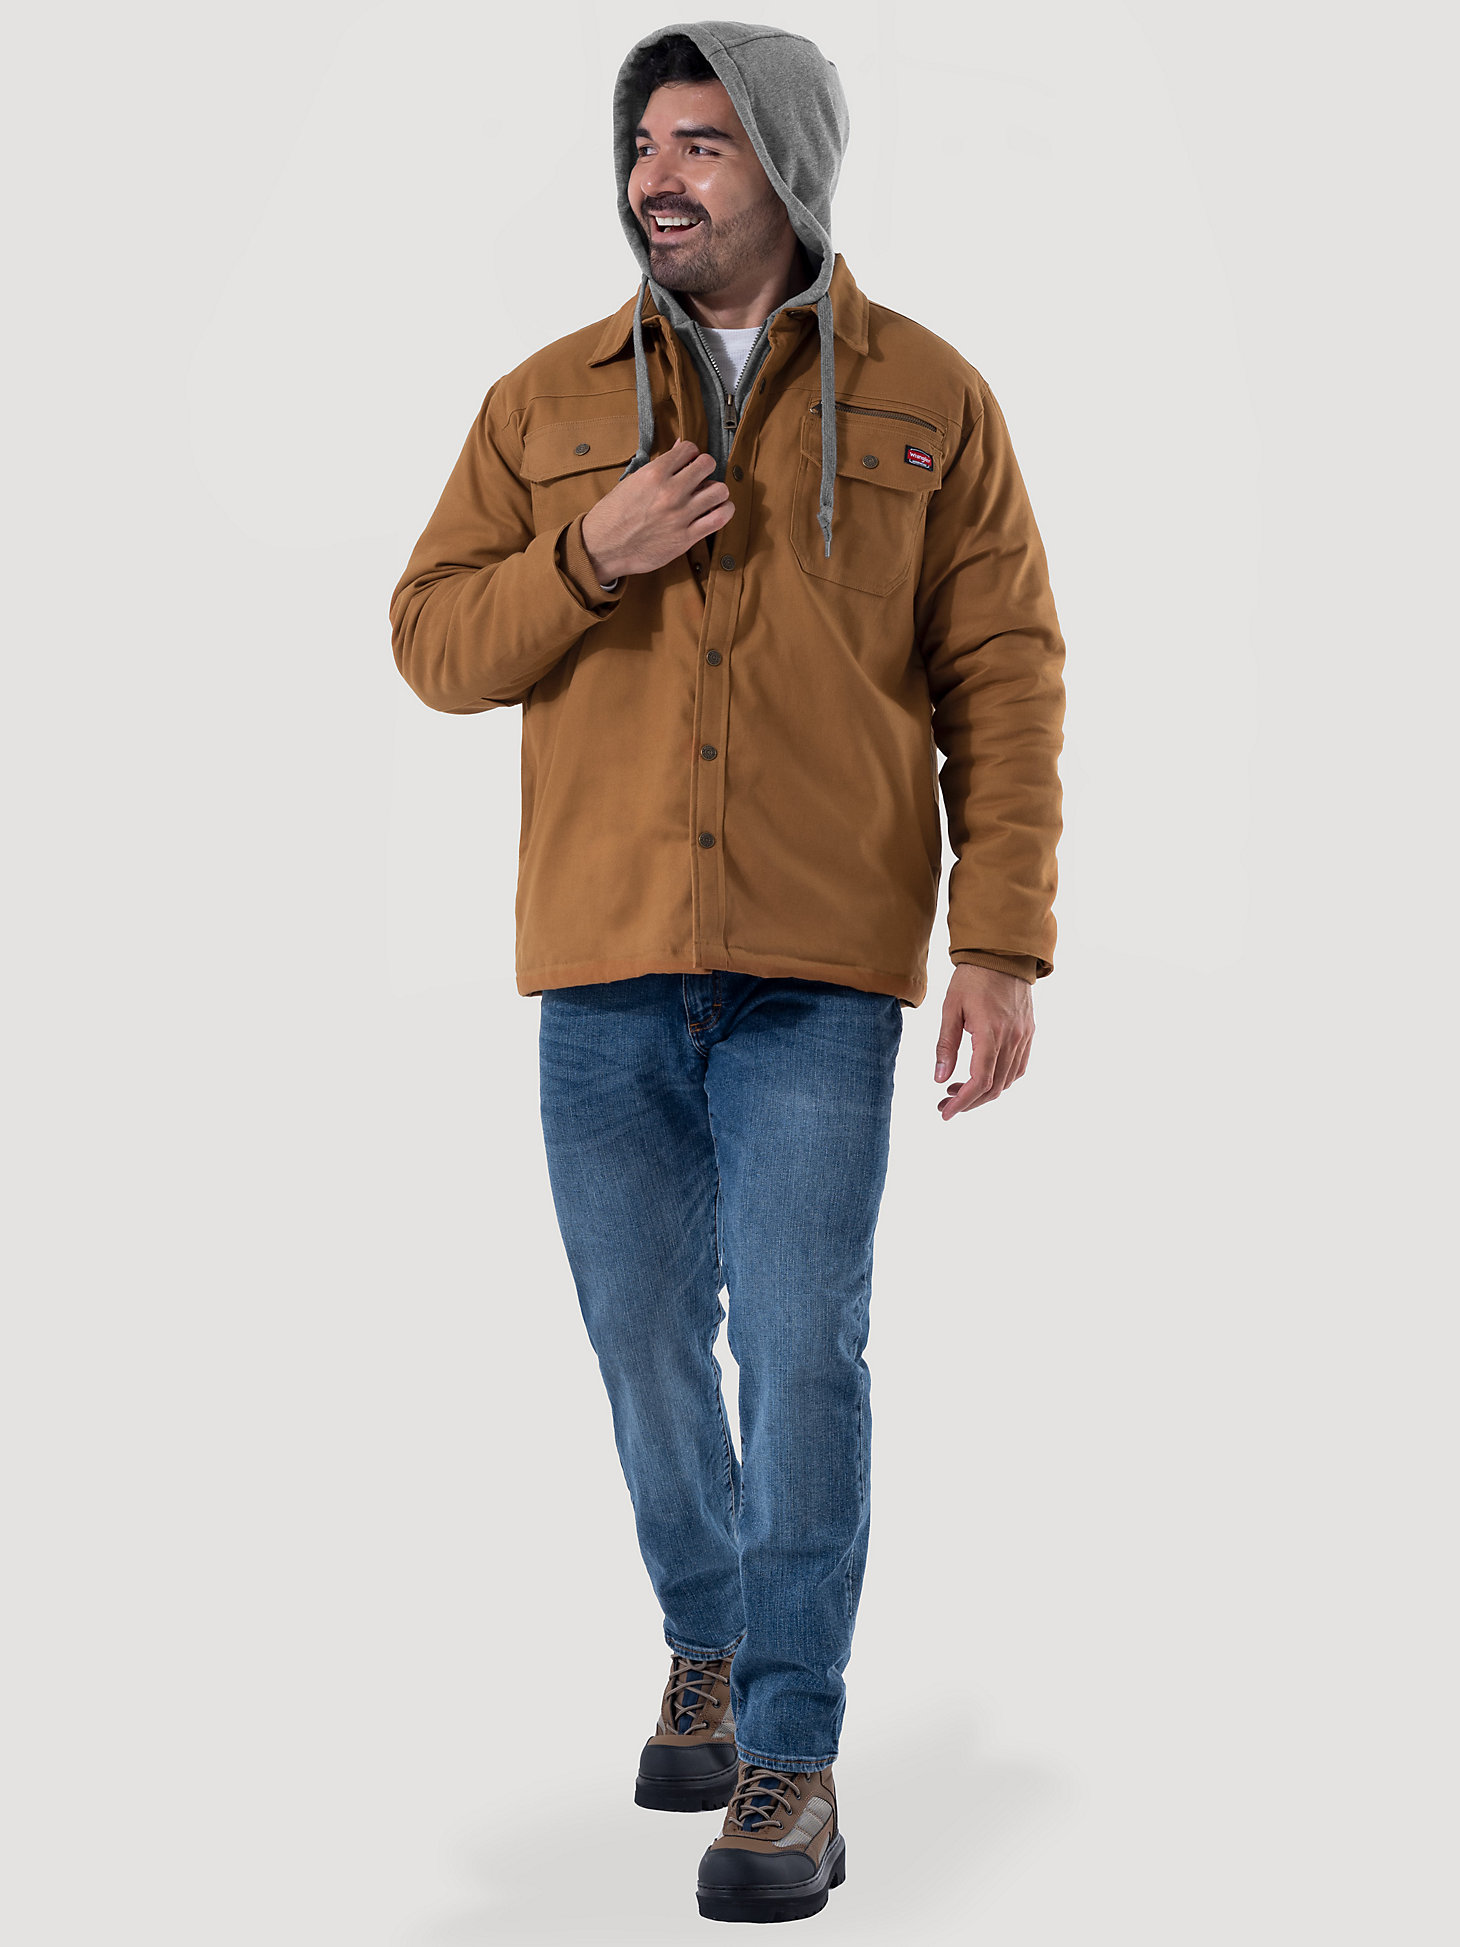 Wrangler® Workwear Quilt Lined Shirt Jacket in Duck main view